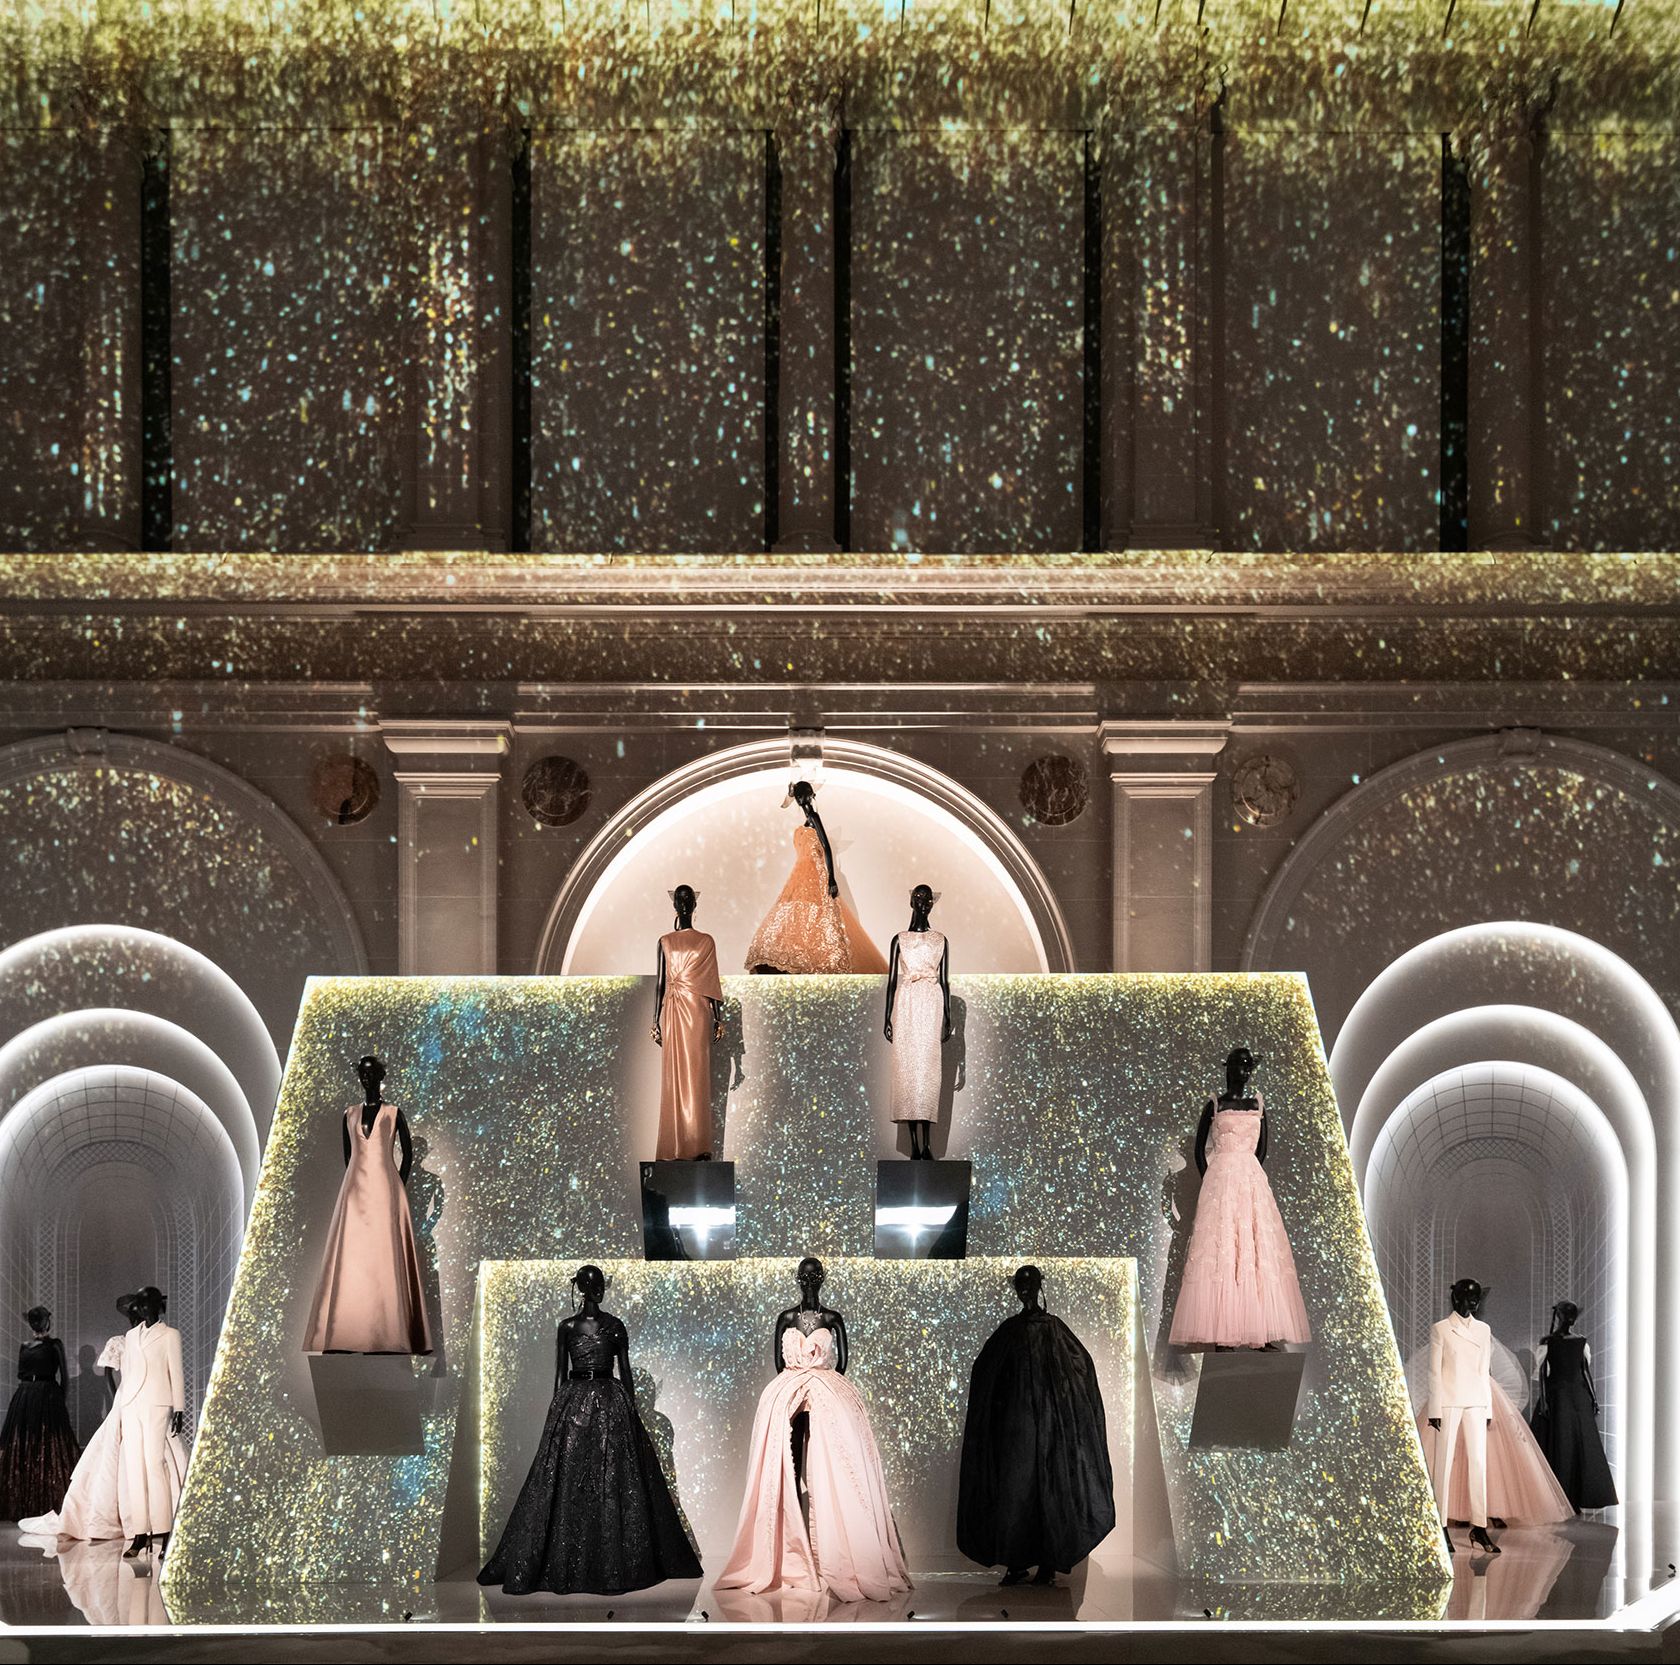 How Dior Got Its Dazzle at the Brooklyn Museum